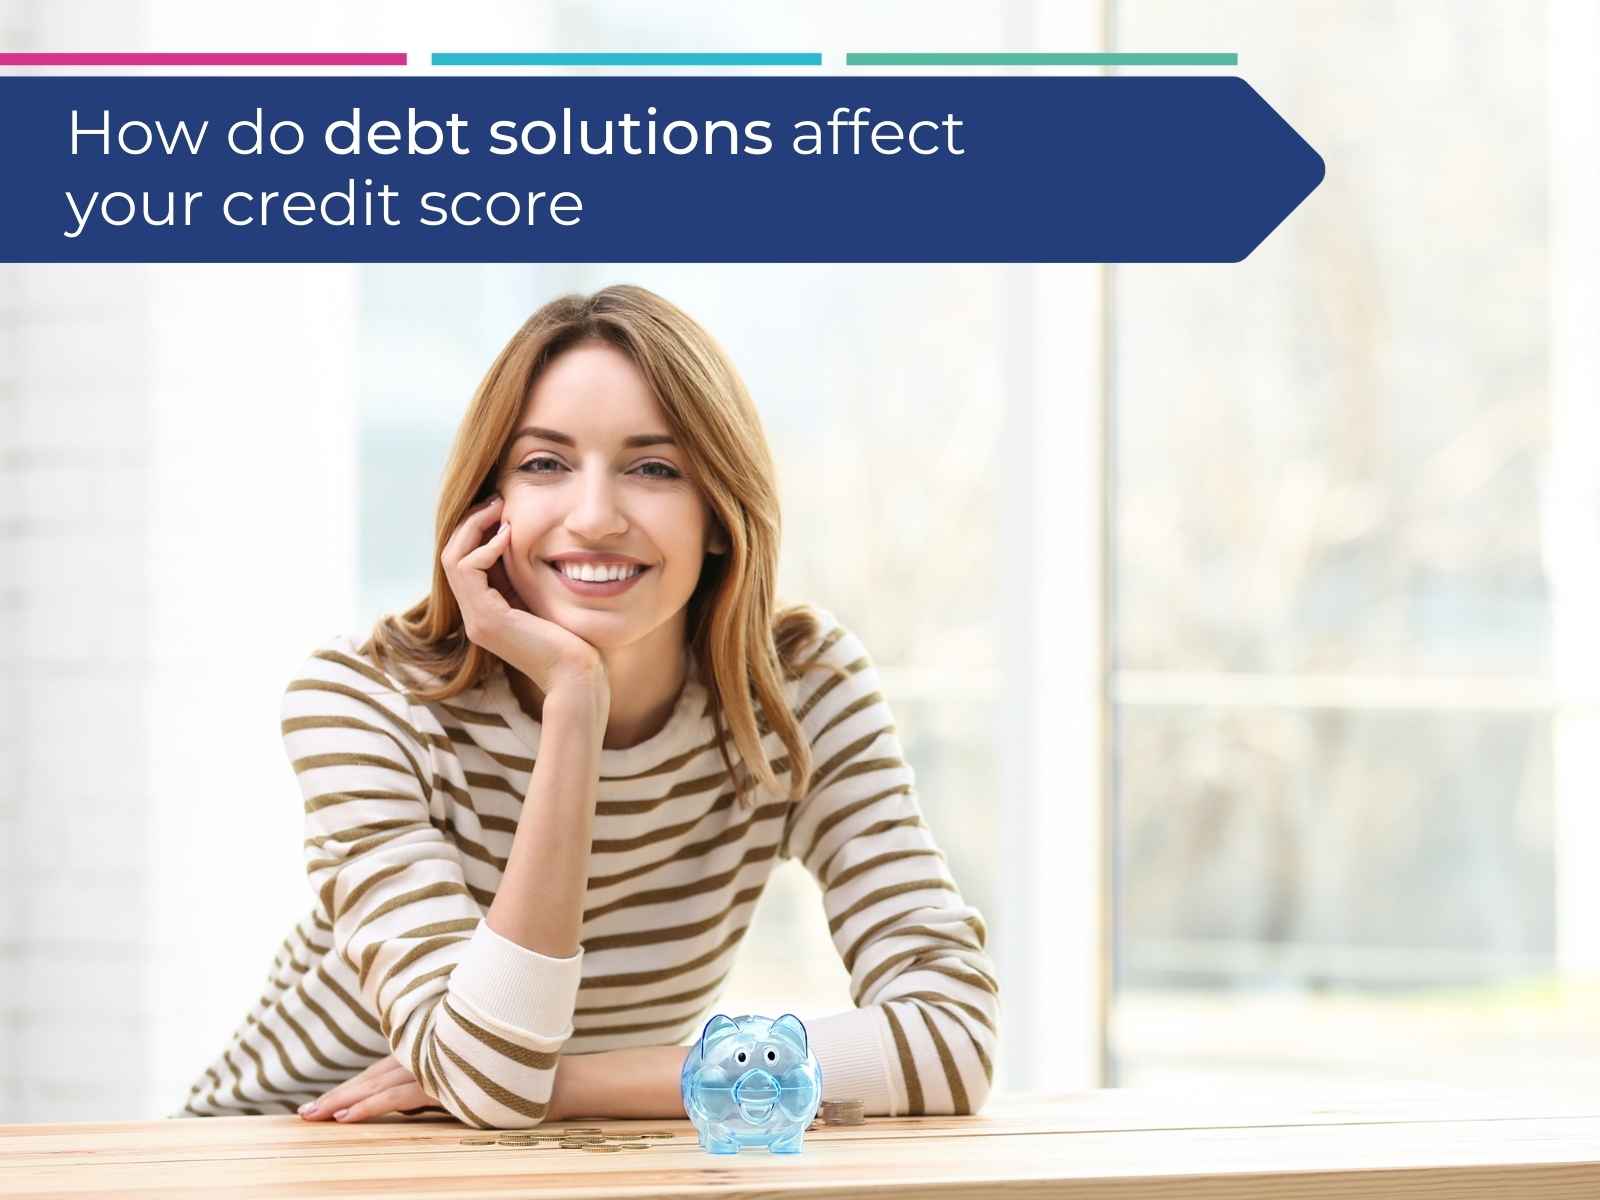 A lady thinking about how debt solutions affect your credit score